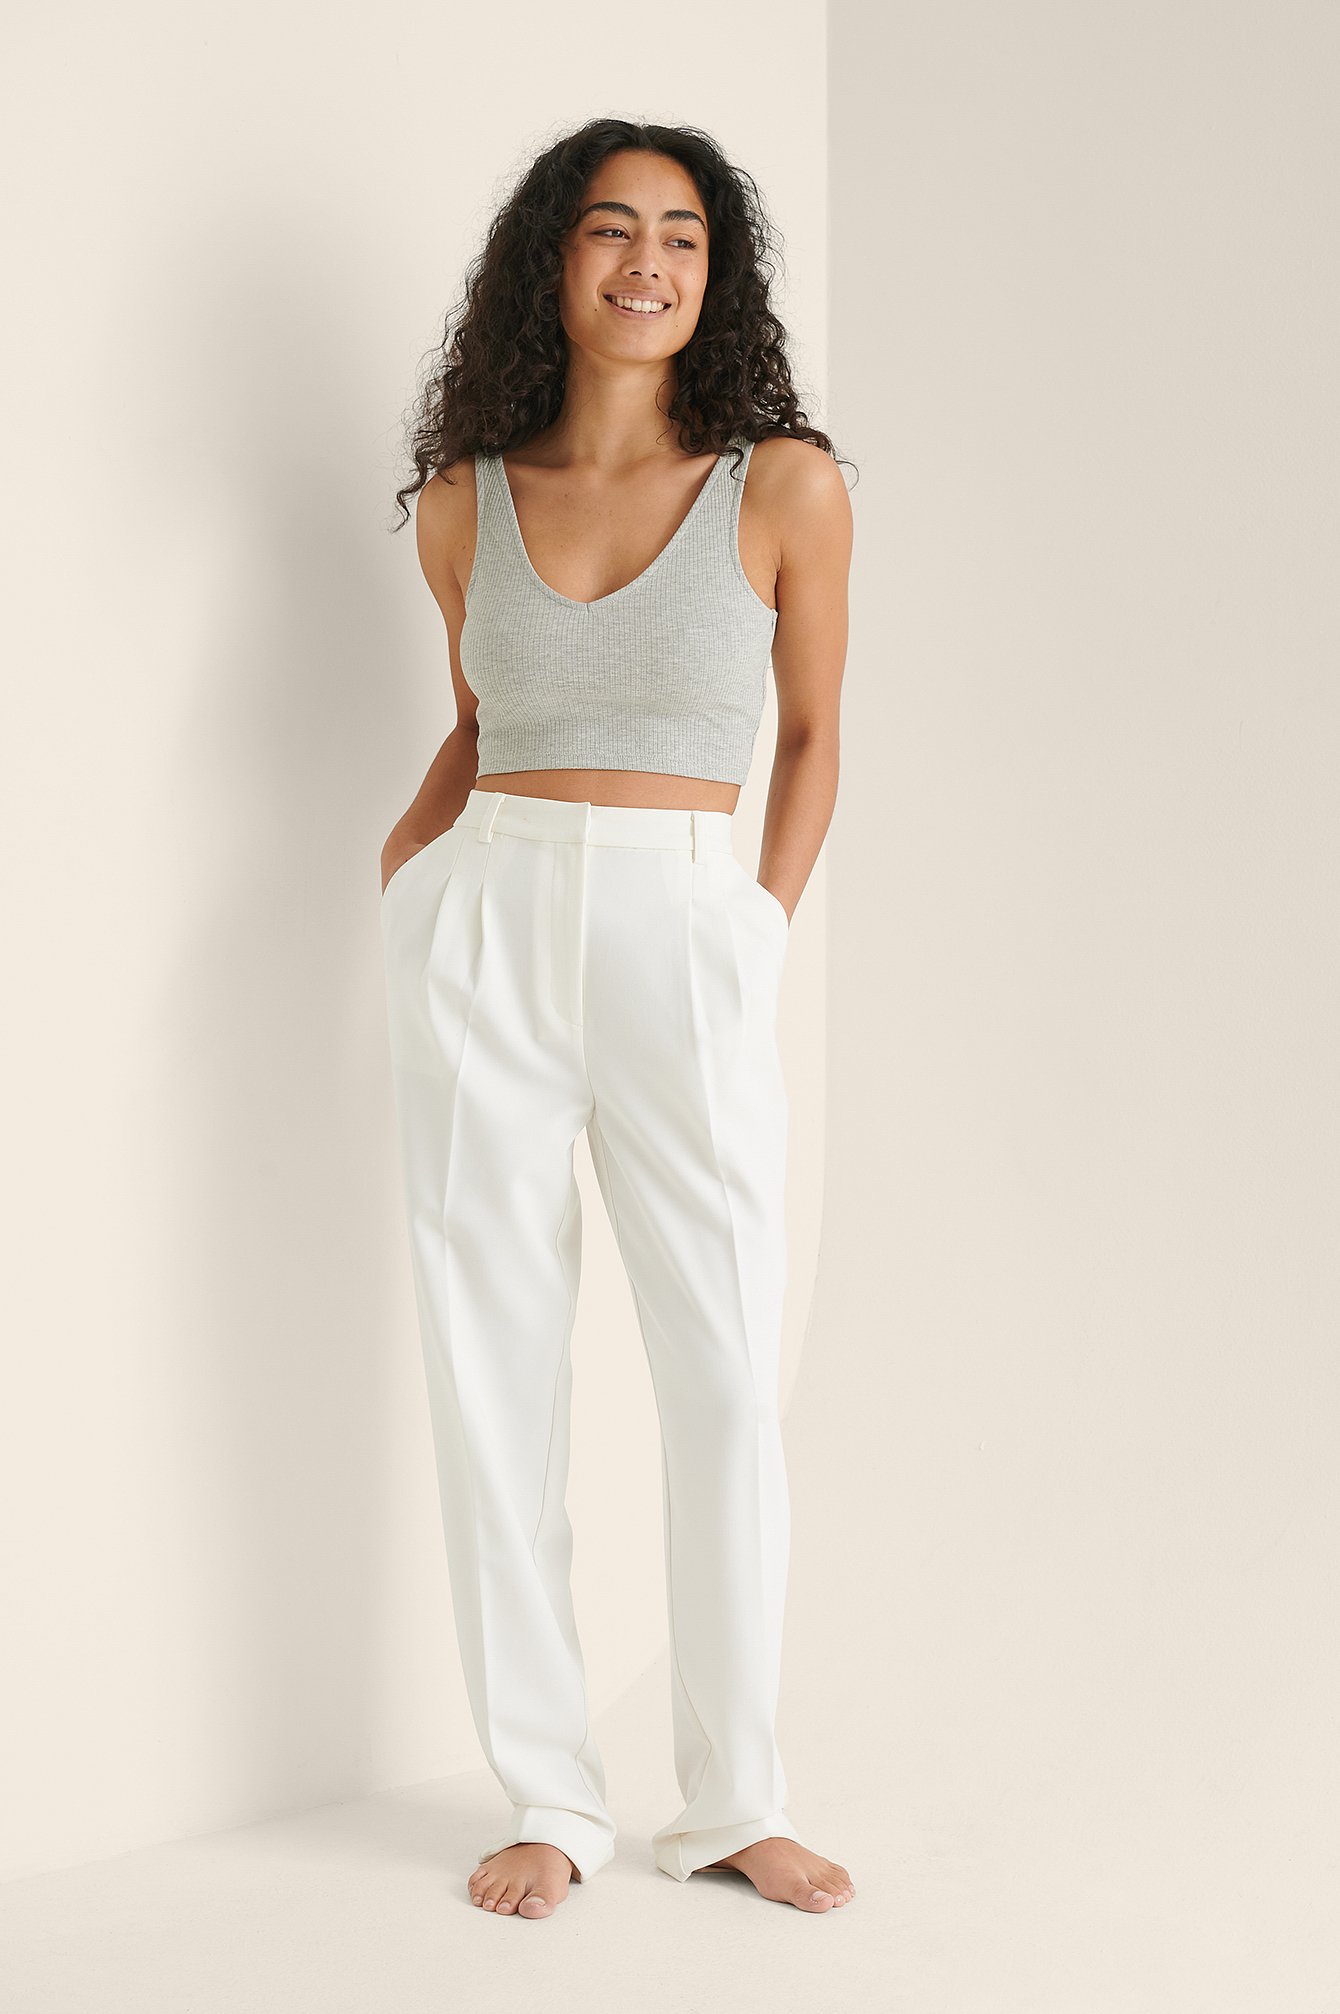 Organic V-Neck Rib Crop Top Outfit